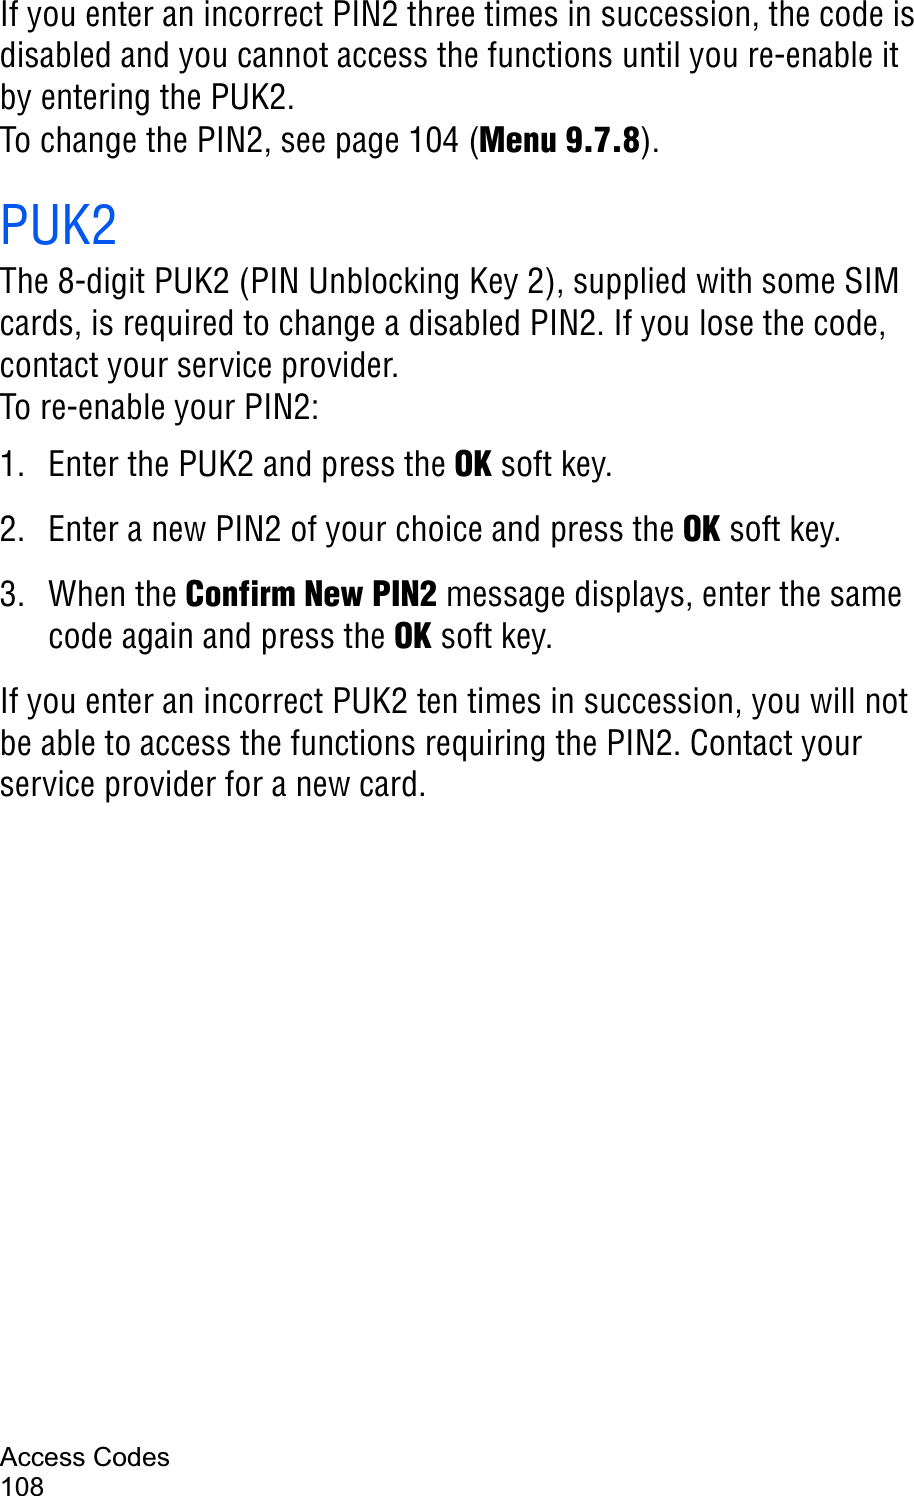 Access Codes108If you enter an incorrect PIN2 three times in succession, the code is disabled and you cannot access the functions until you re-enable it by entering the PUK2.To change the PIN2, see page 104 (Menu 9.7.8).PUK2The 8-digit PUK2 (PIN Unblocking Key 2), supplied with some SIM cards, is required to change a disabled PIN2. If you lose the code, contact your service provider.To re-enable your PIN2:1. Enter the PUK2 and press the OK soft key.2. Enter a new PIN2 of your choice and press the OK soft key.3. When the Confirm New PIN2 message displays, enter the same code again and press the OK soft key.If you enter an incorrect PUK2 ten times in succession, you will not be able to access the functions requiring the PIN2. Contact your service provider for a new card.